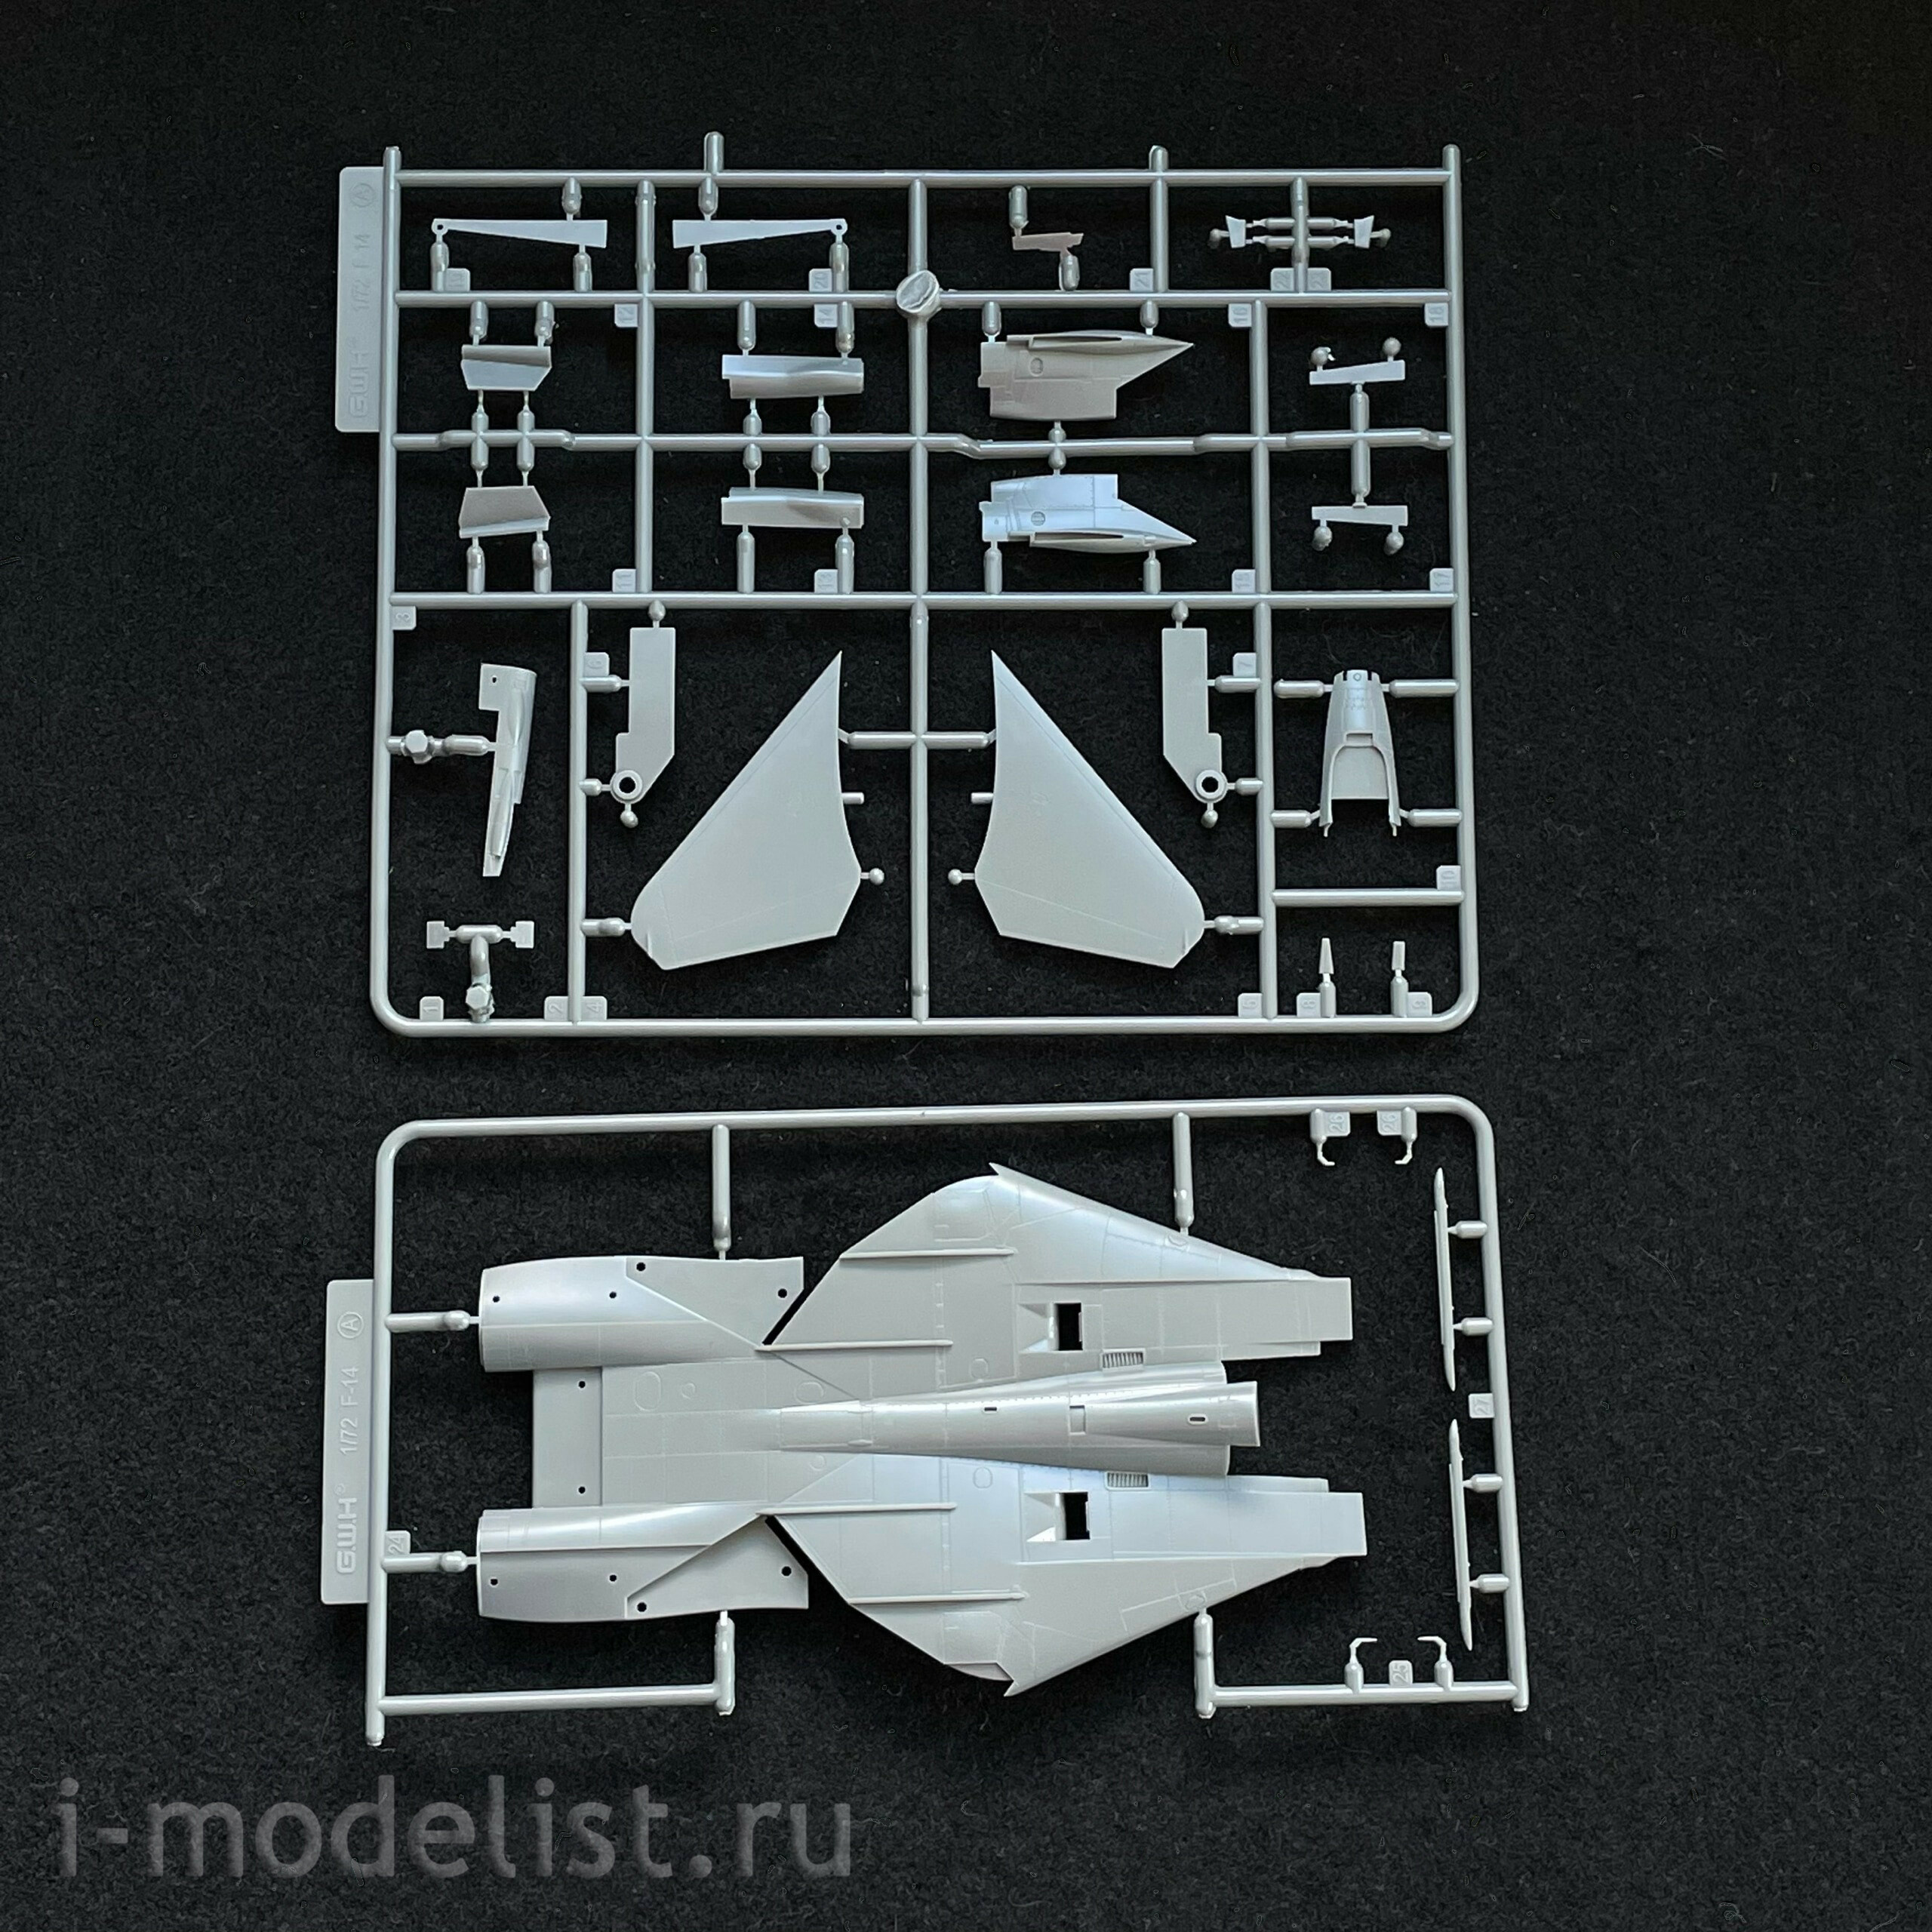 L7206 Great Wall Hobby 1/72 F-14A Tomcat